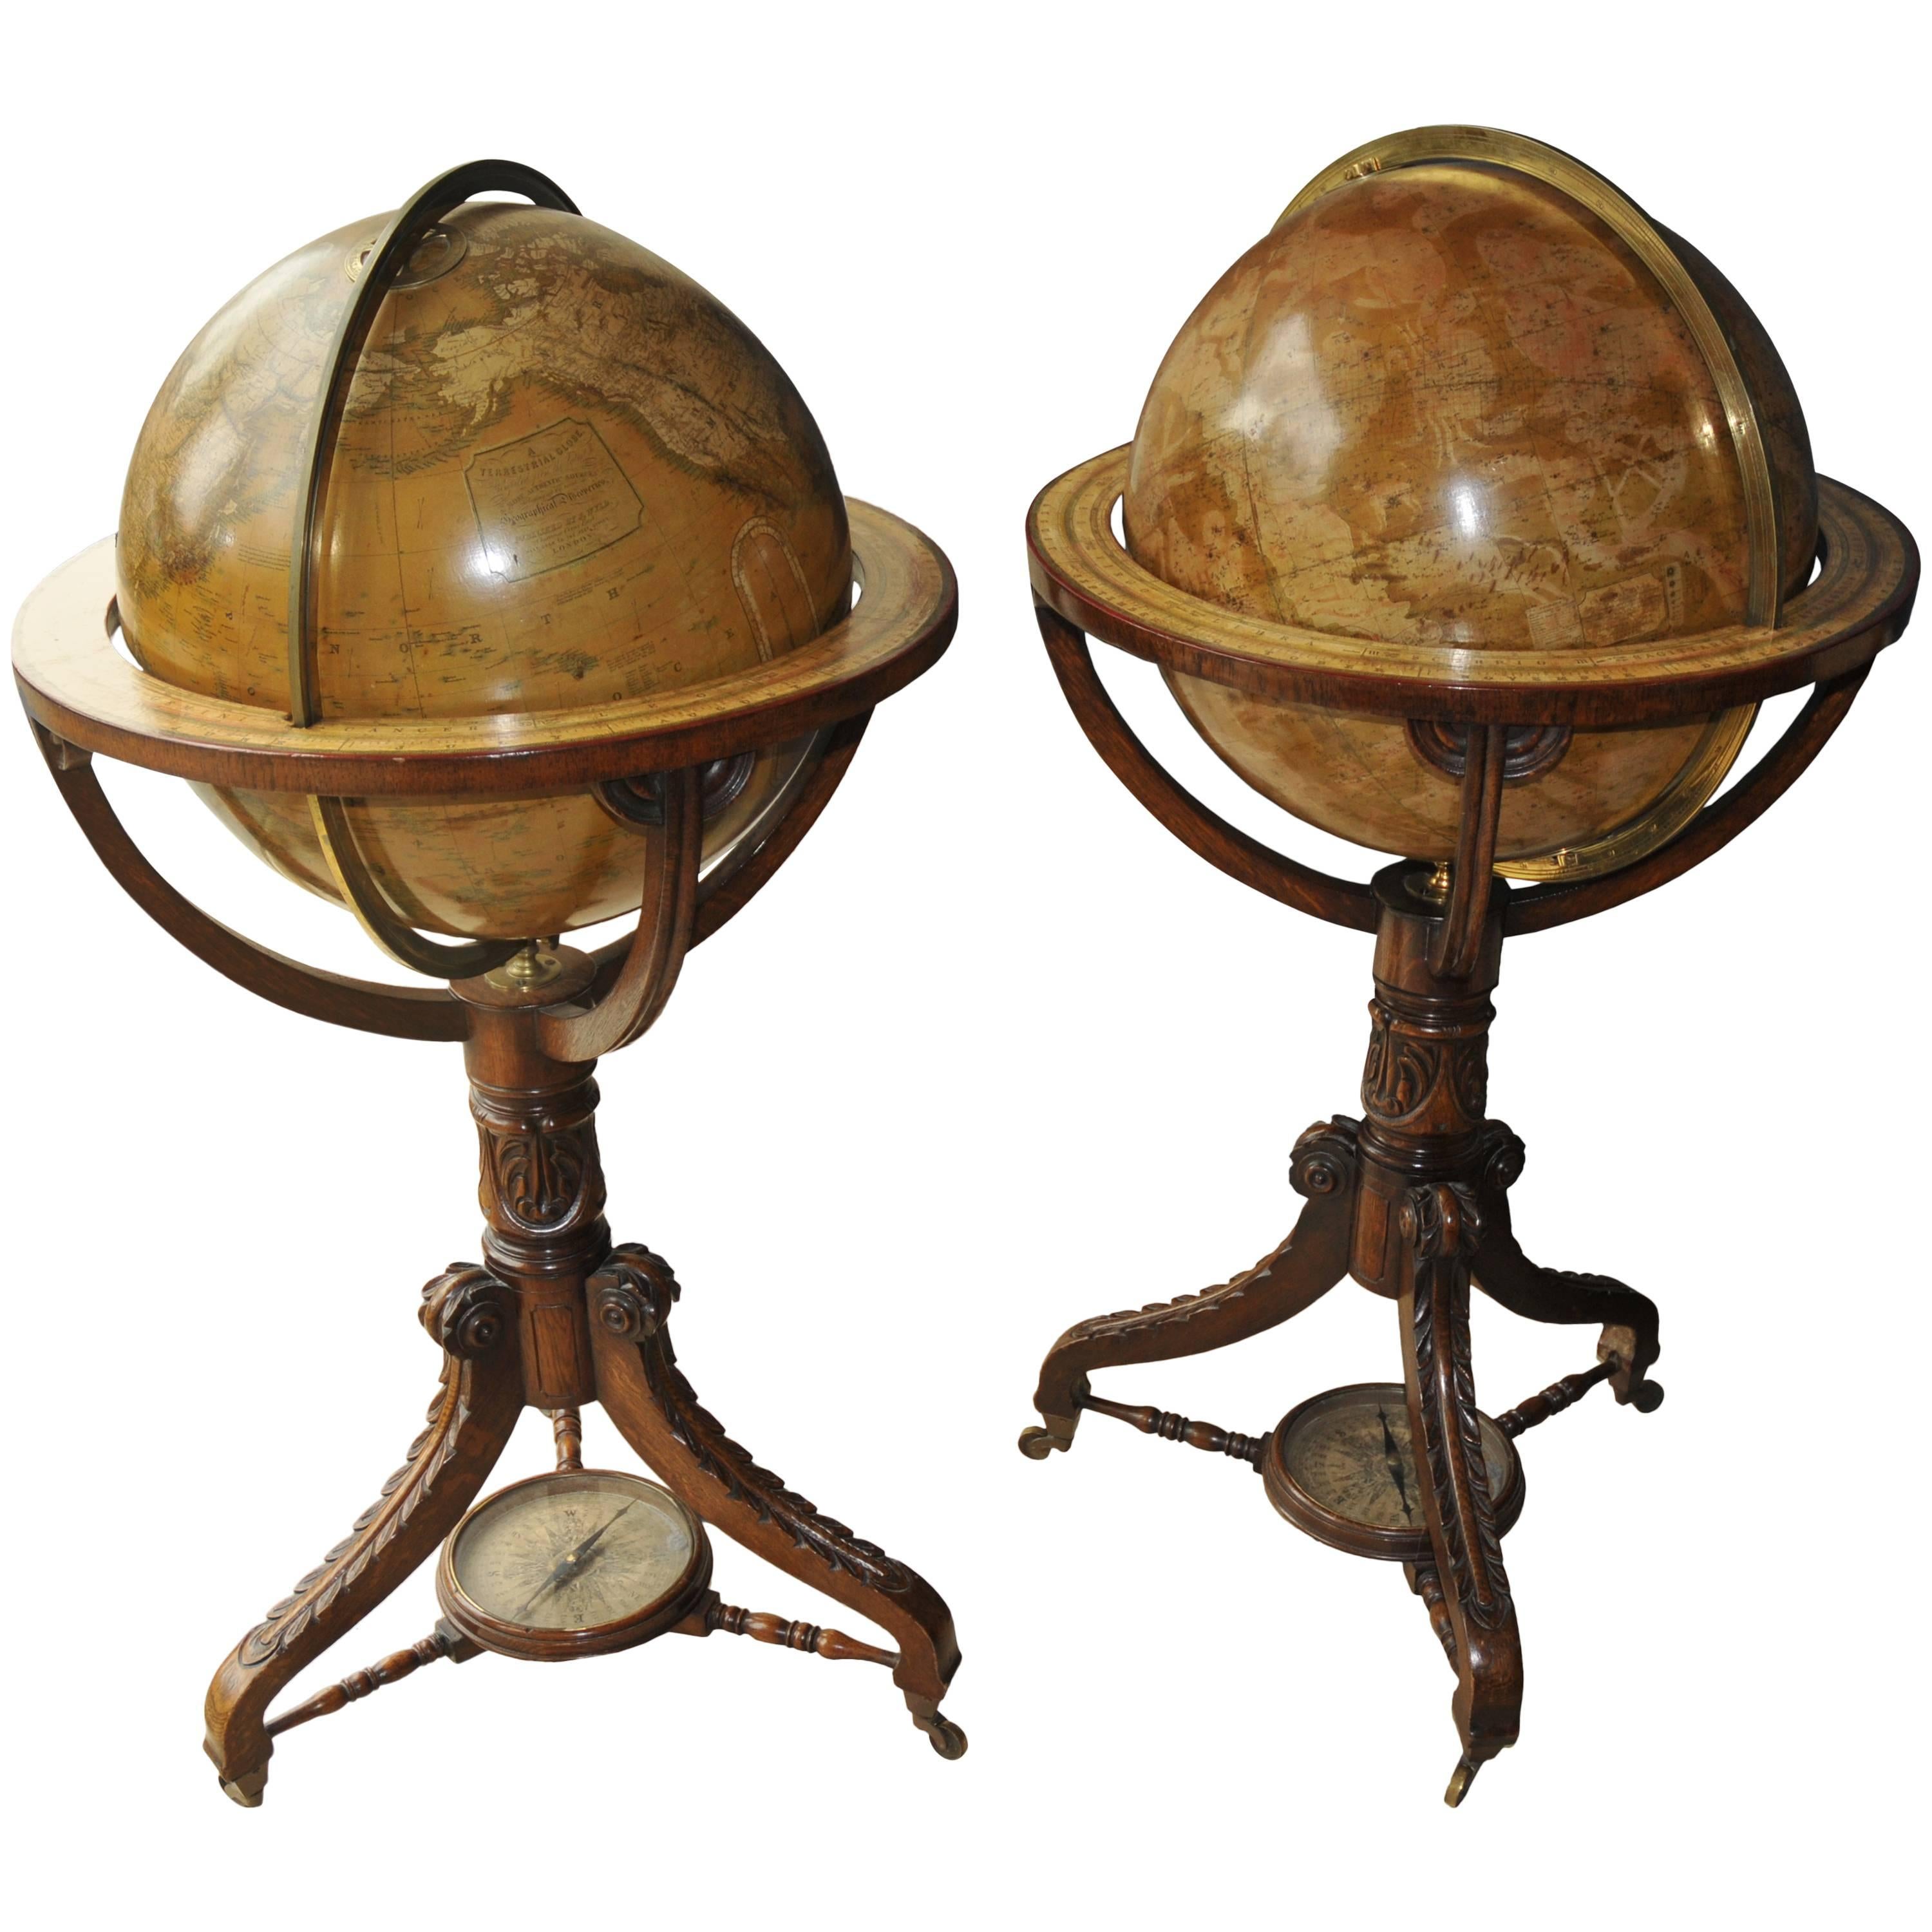 Massive Pair of English Origin Library Globes Signs J. Wyld